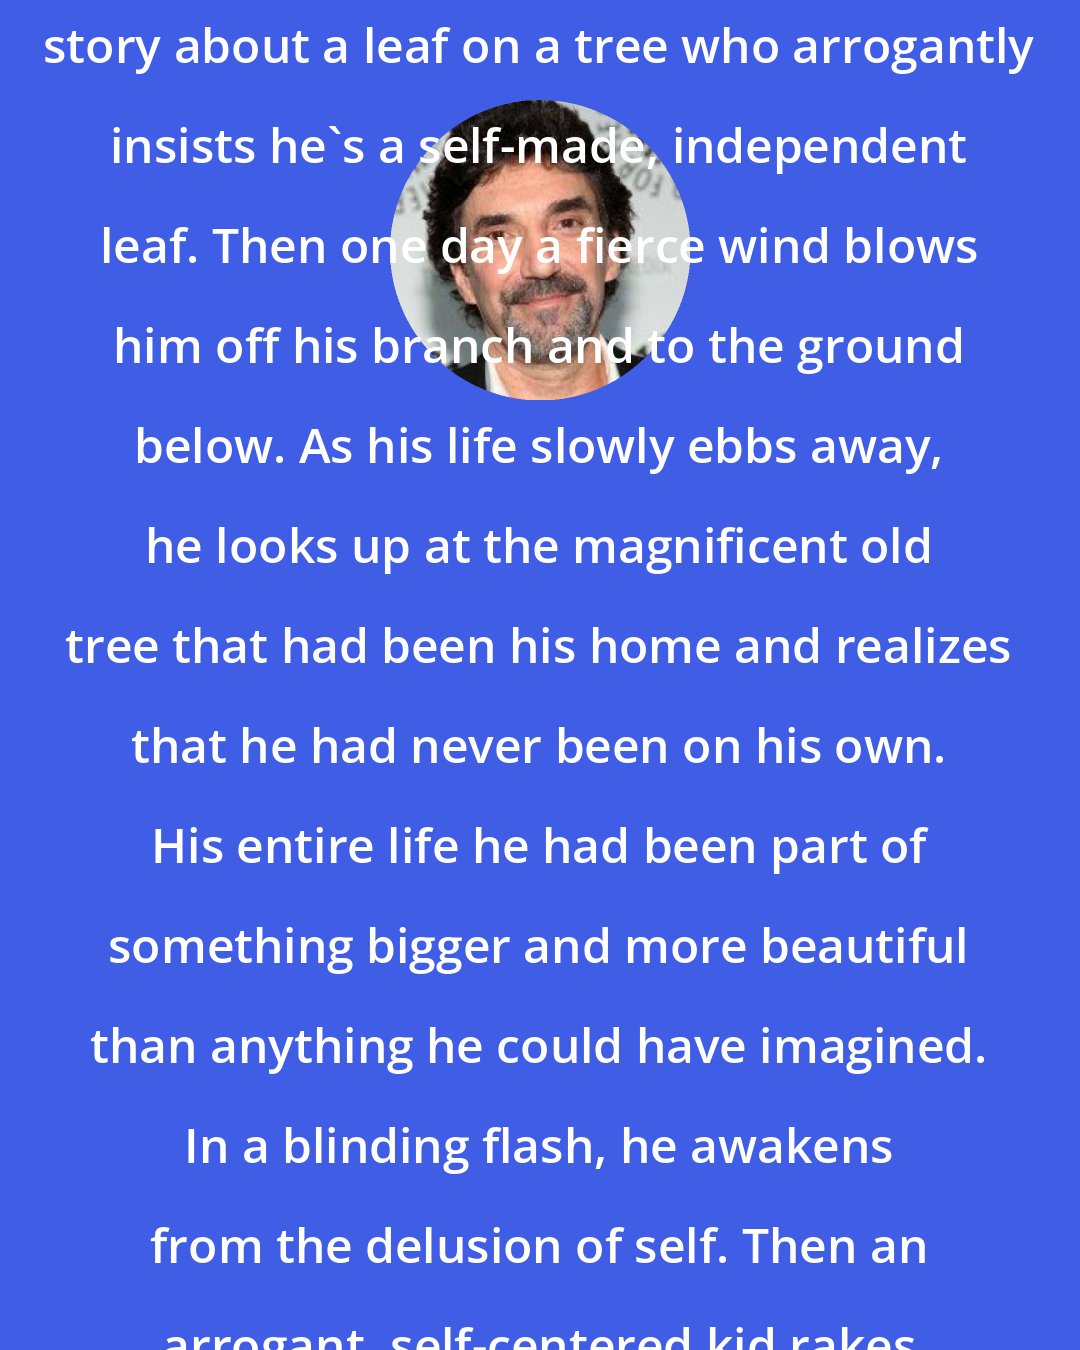 Chuck Lorre: I'm thinking of writing a children's story about a leaf on a tree who arrogantly insists he's a self-made, independent leaf. Then one day a fierce wind blows him off his branch and to the ground below. As his life slowly ebbs away, he looks up at the magnificent old tree that had been his home and realizes that he had never been on his own. His entire life he had been part of something bigger and more beautiful than anything he could have imagined. In a blinding flash, he awakens from the delusion of self. Then an arrogant, self-centered kid rakes him up and bags him.